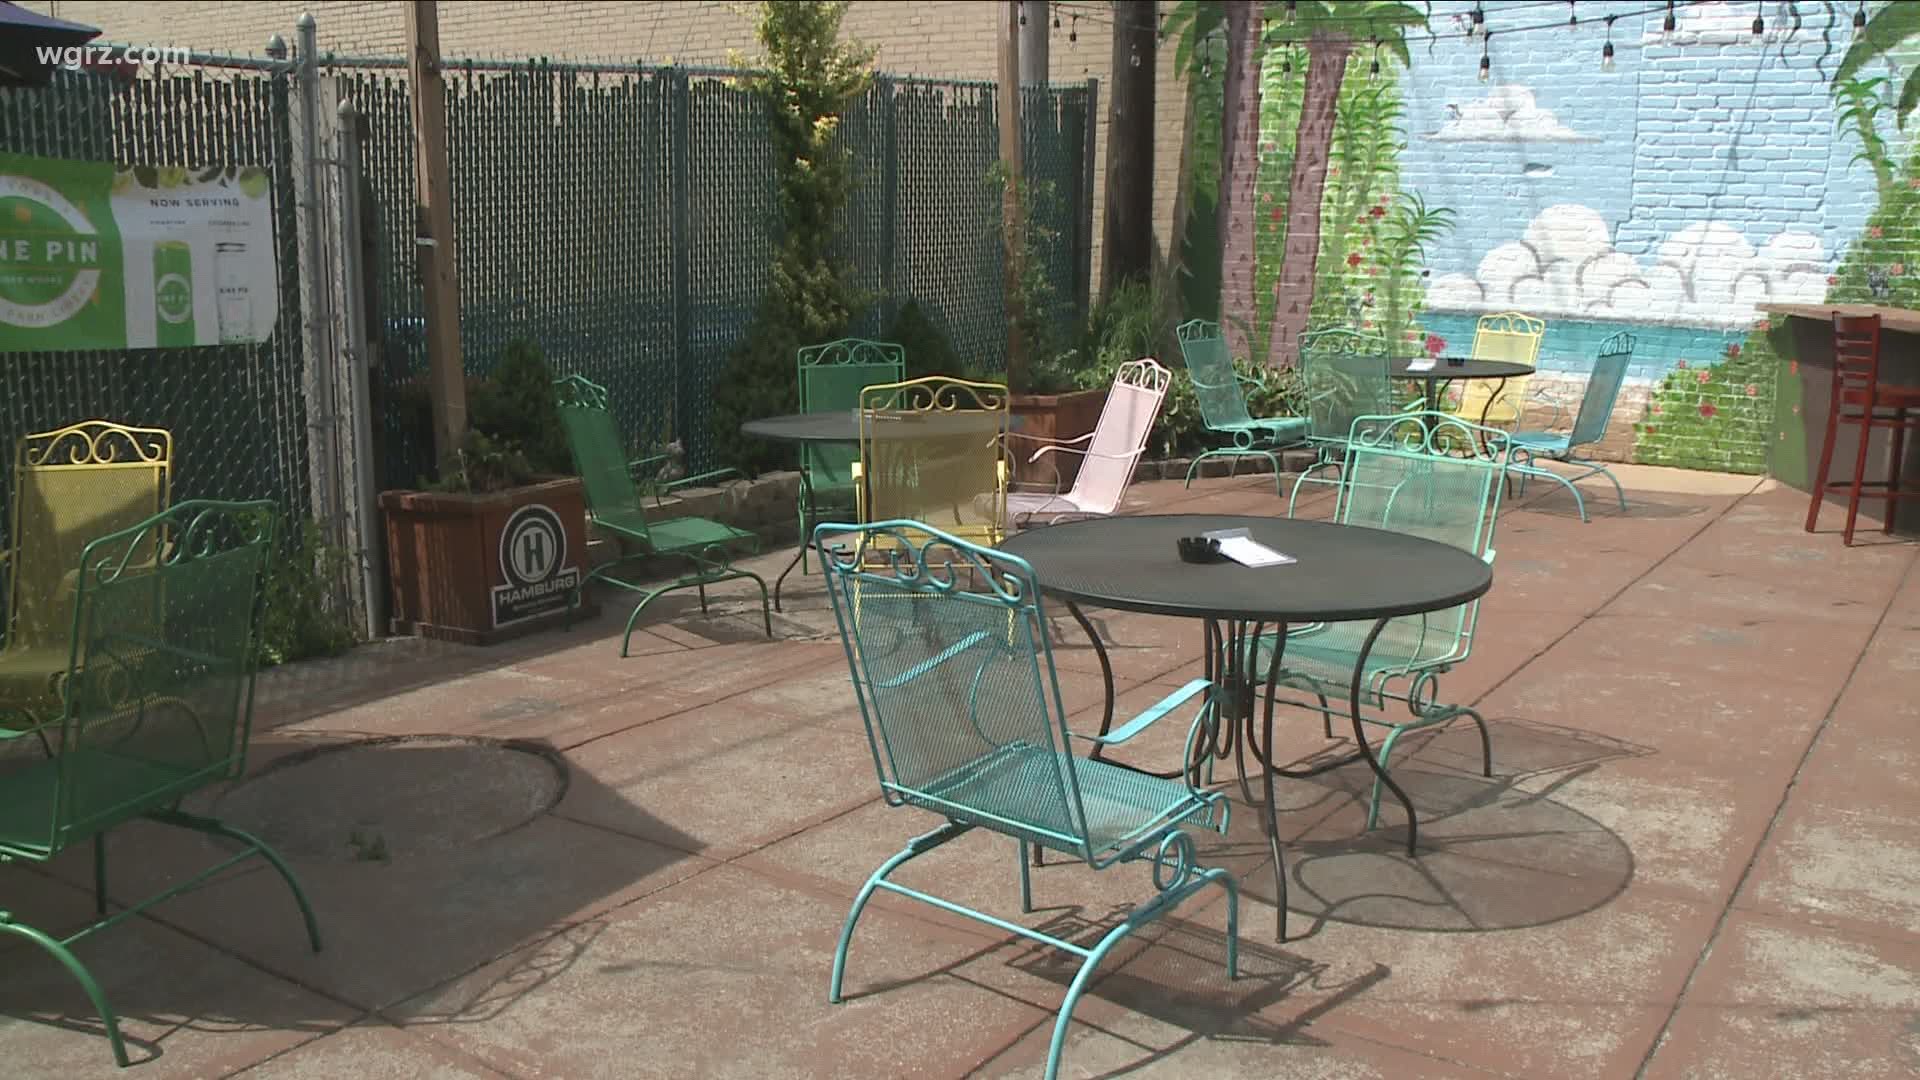 The city of Buffalo and some bar owners on Chippewa Street took outdoor dining to a different level last night with their block party approach to help them out,.